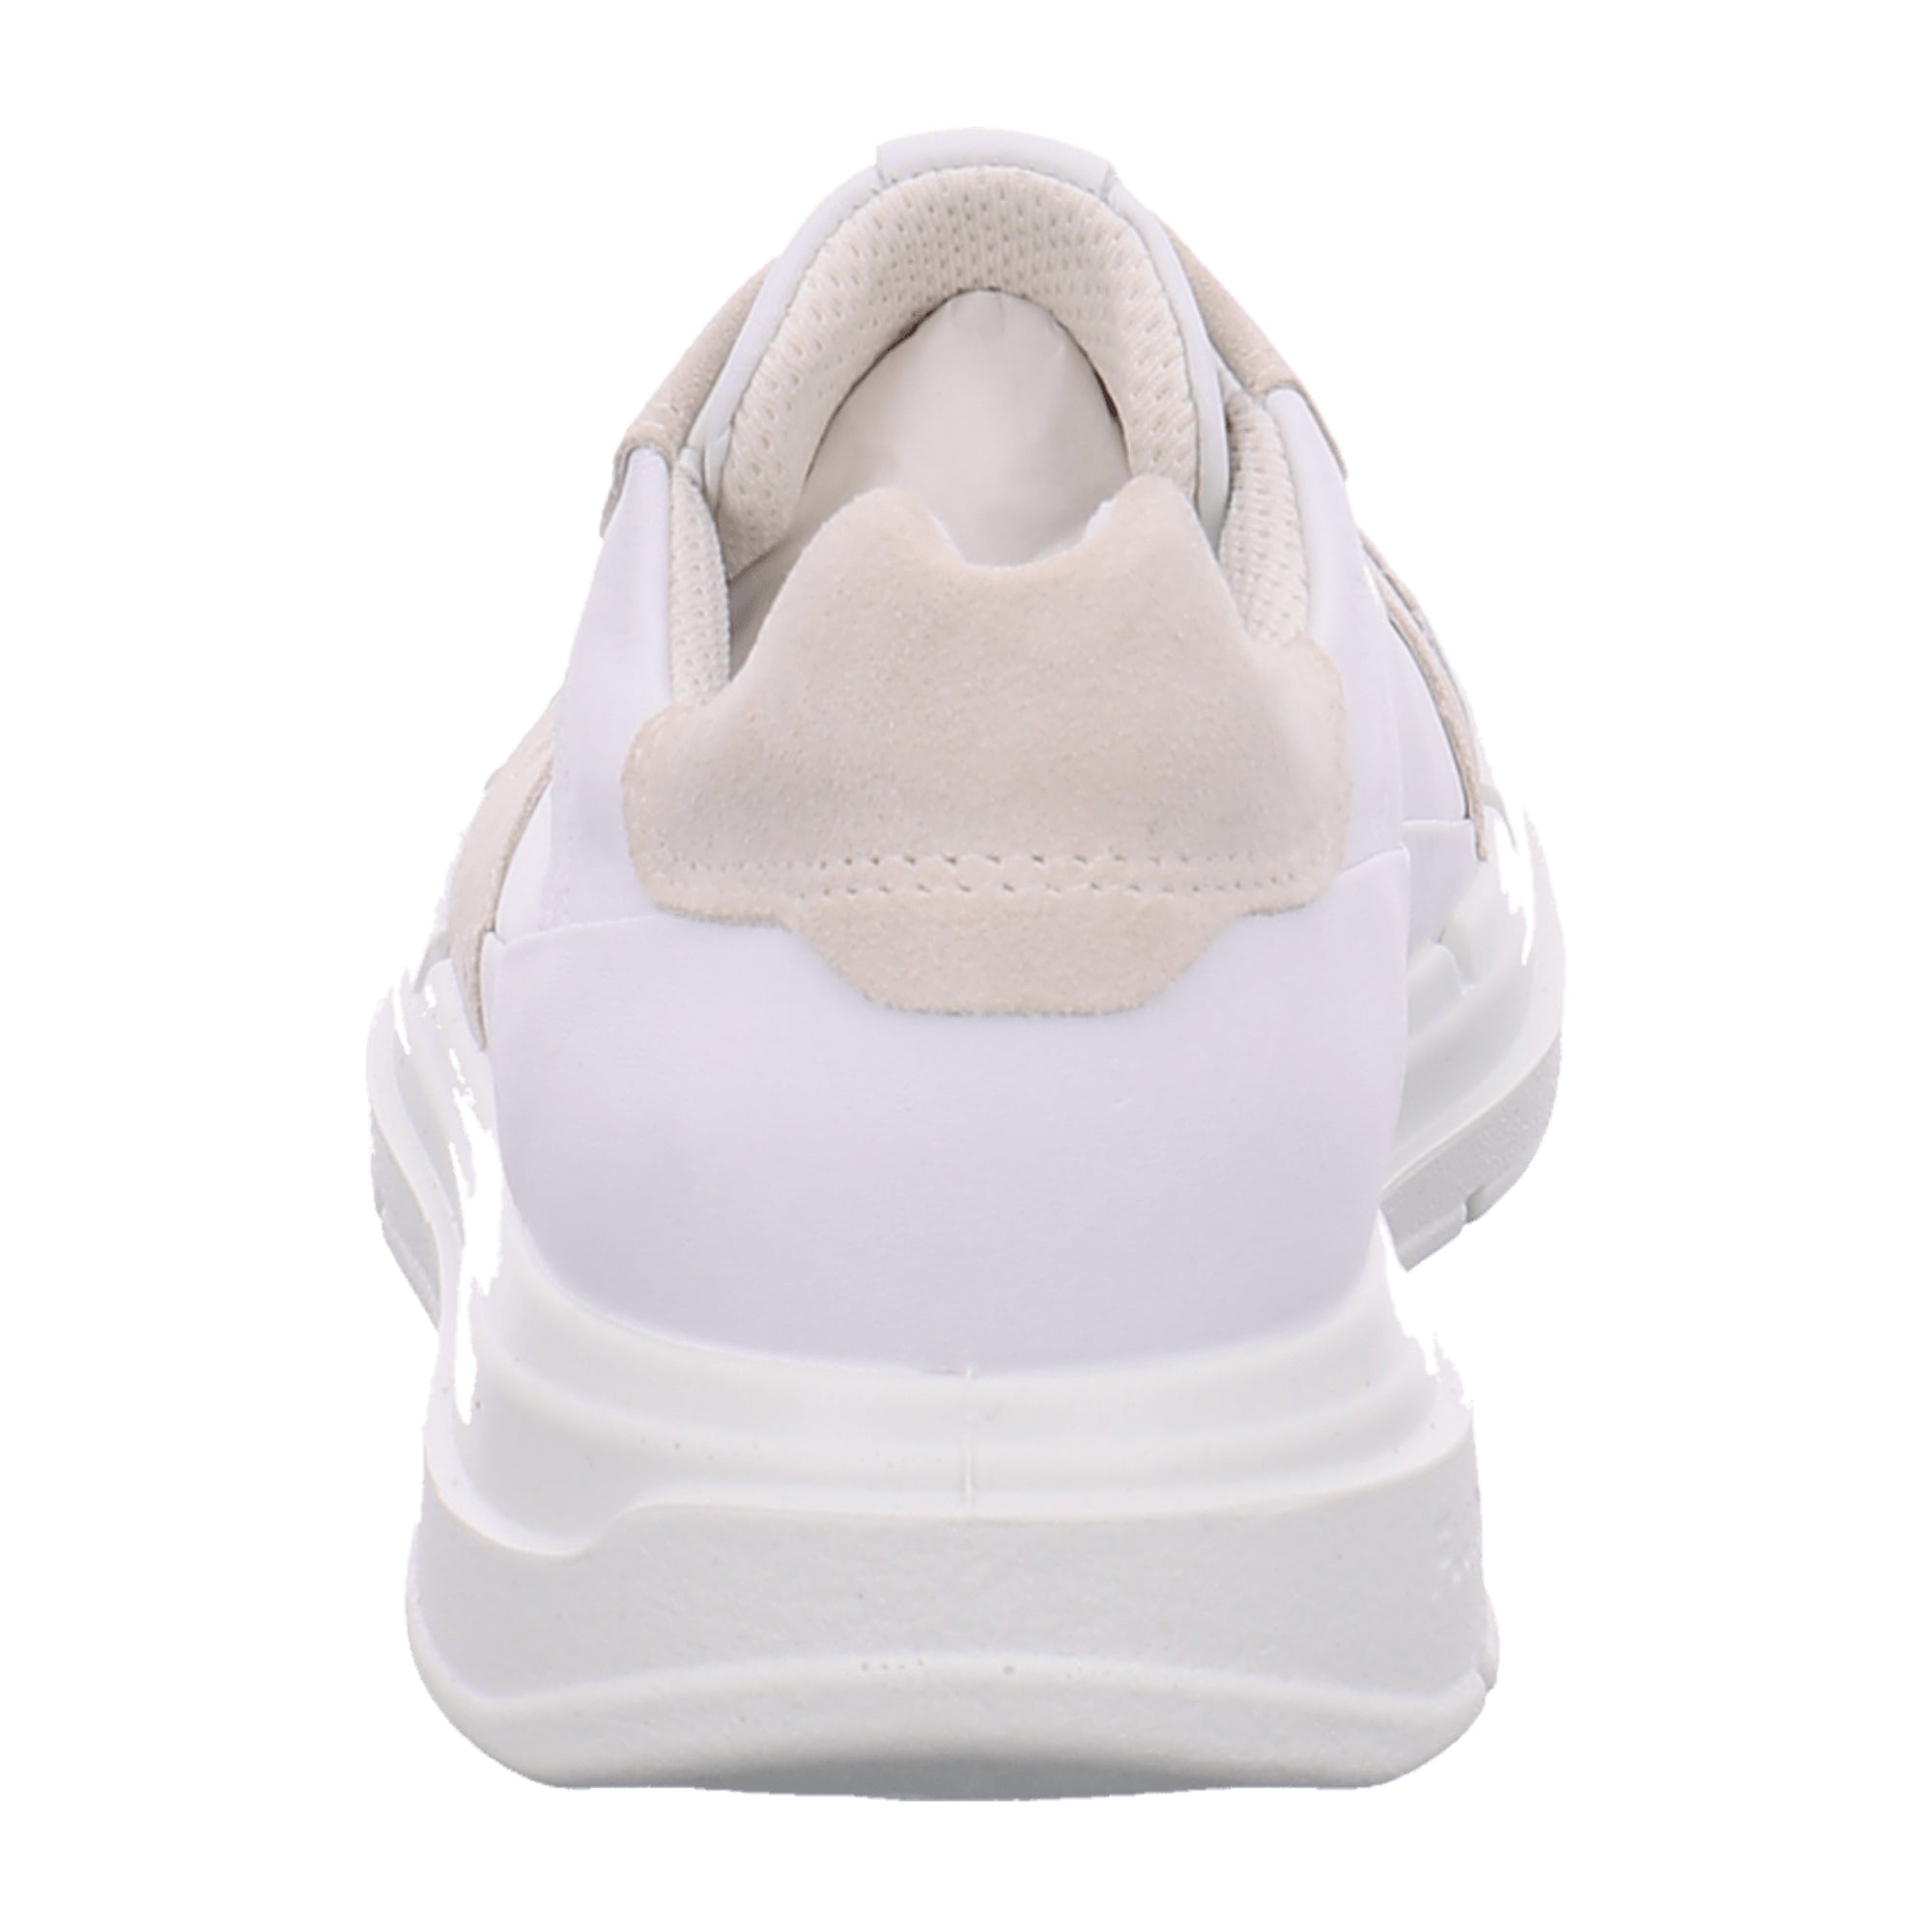 Ecco 420403 Women's White Sneakers - Stylish & Durable Casual Shoes